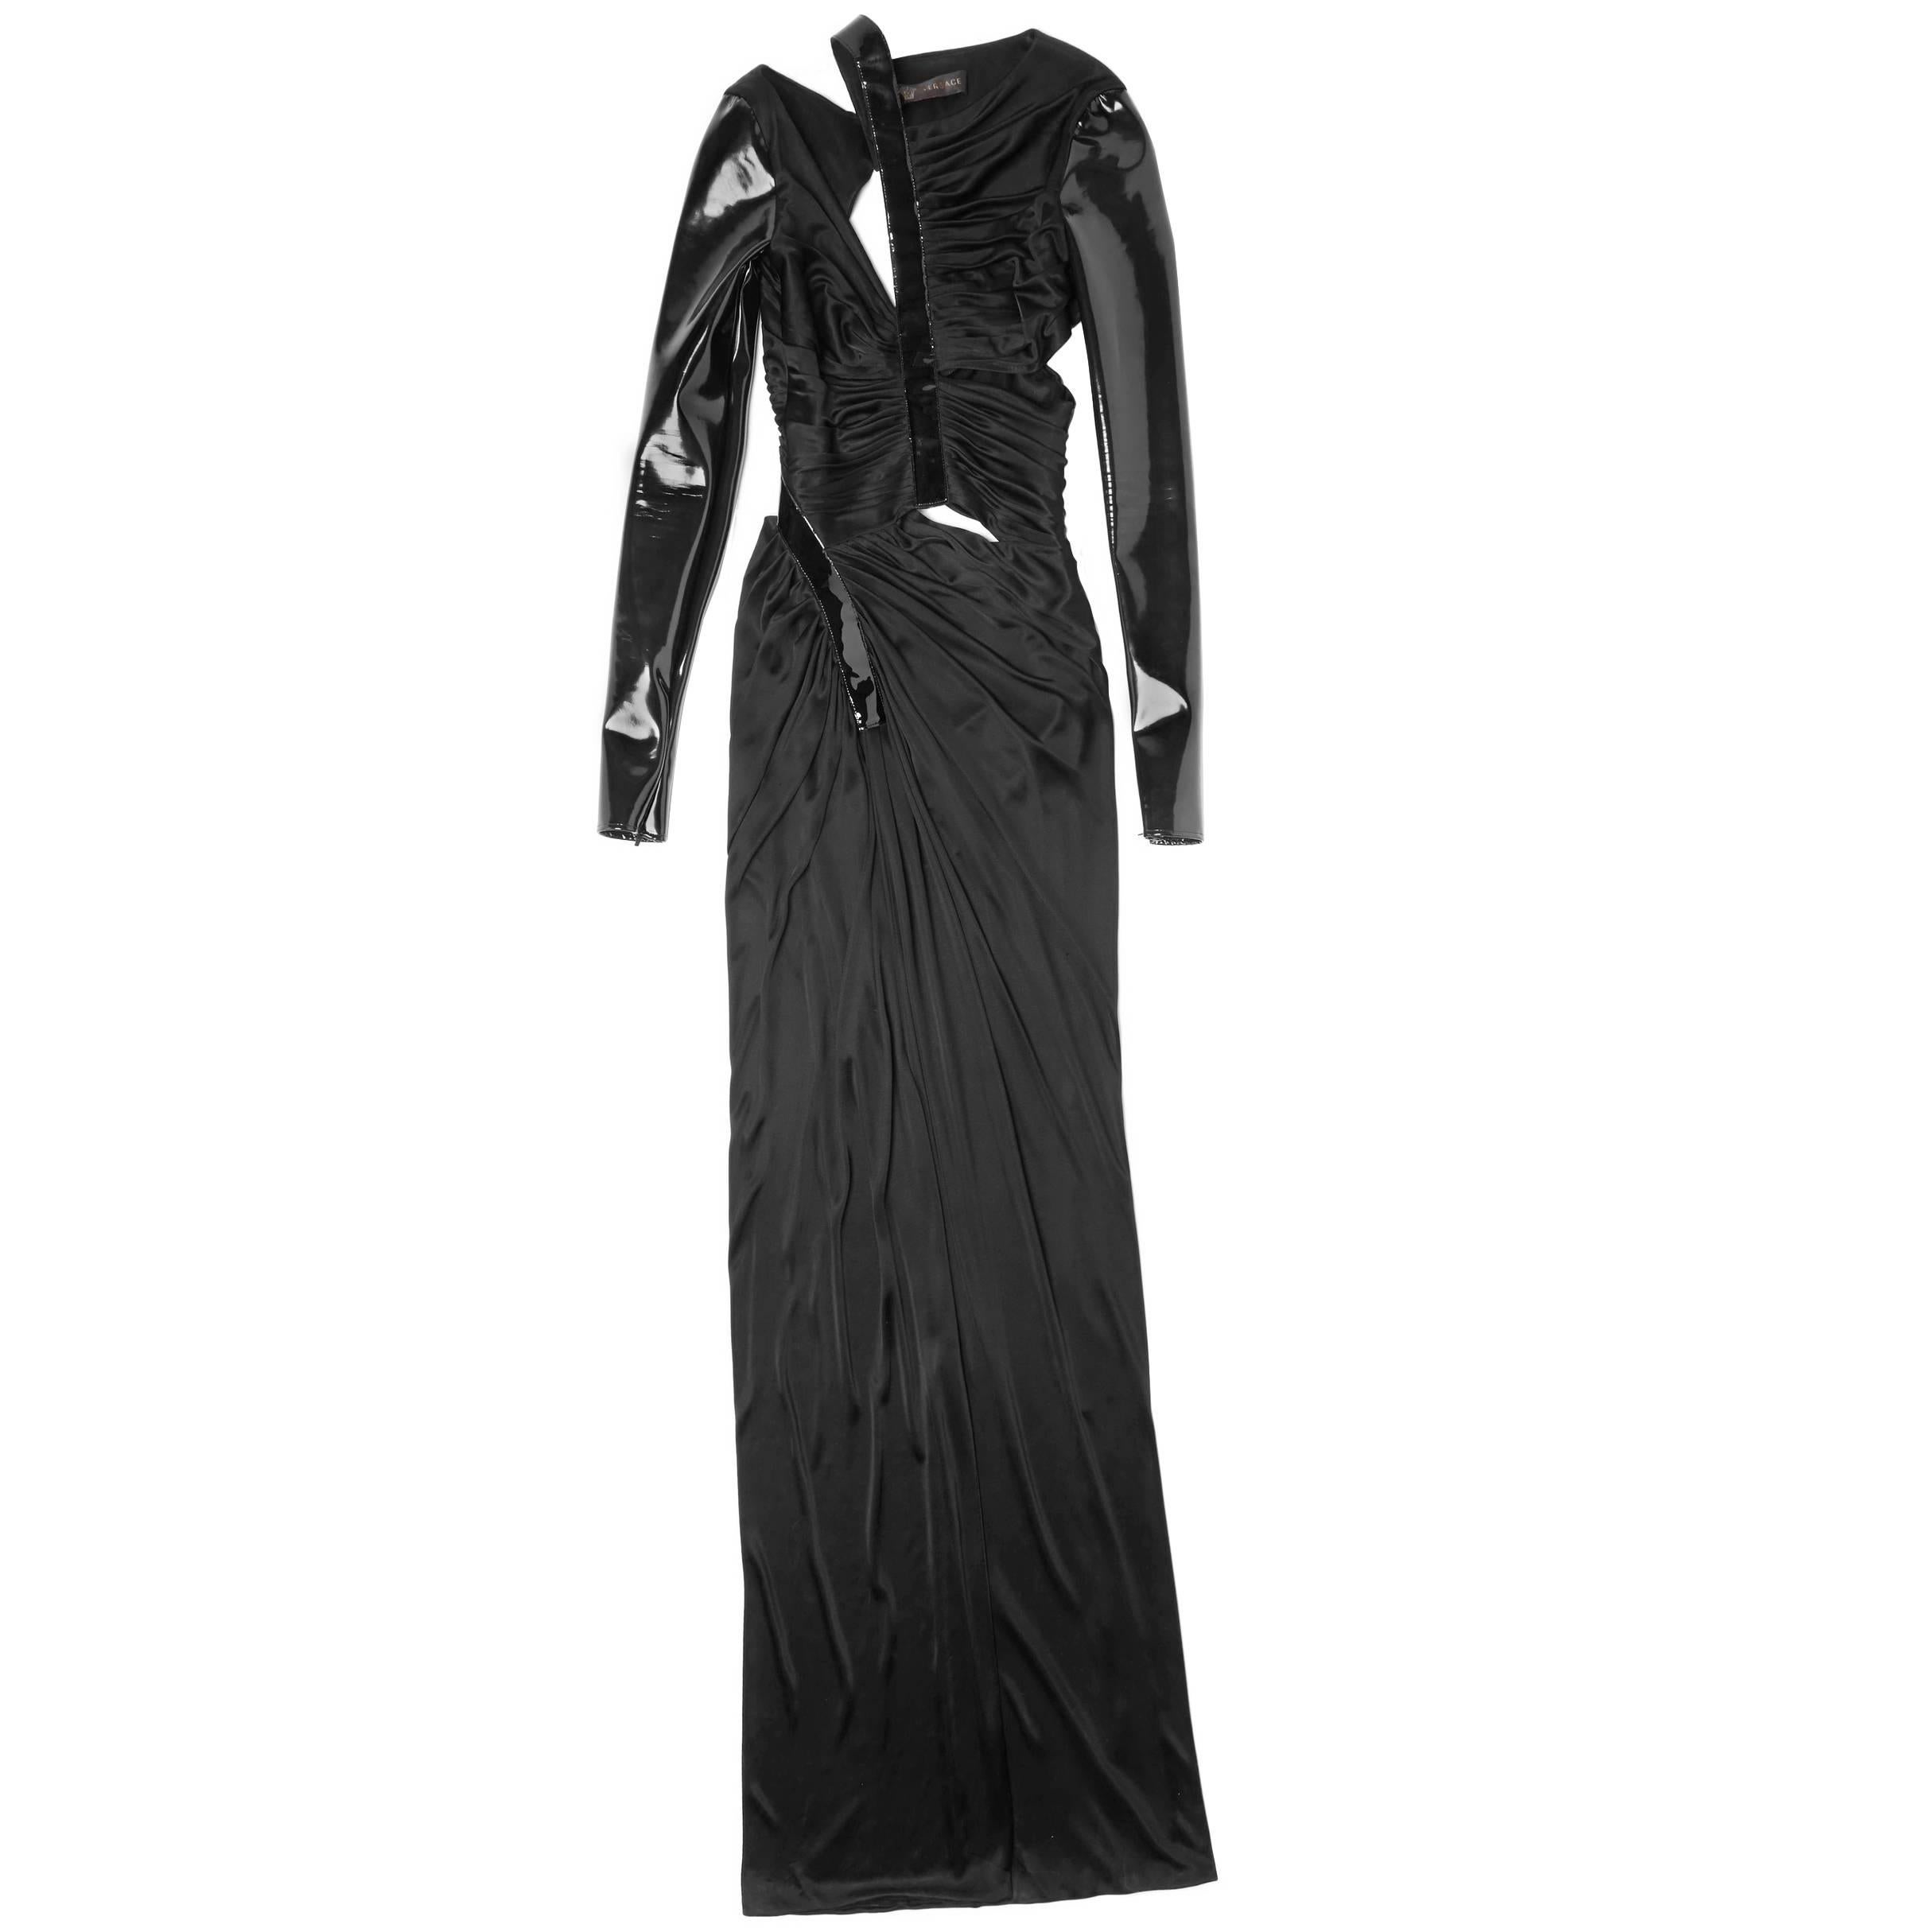 New VERSACE Hottest Black Liquid Jersey Gown With Vinyl Sleeves